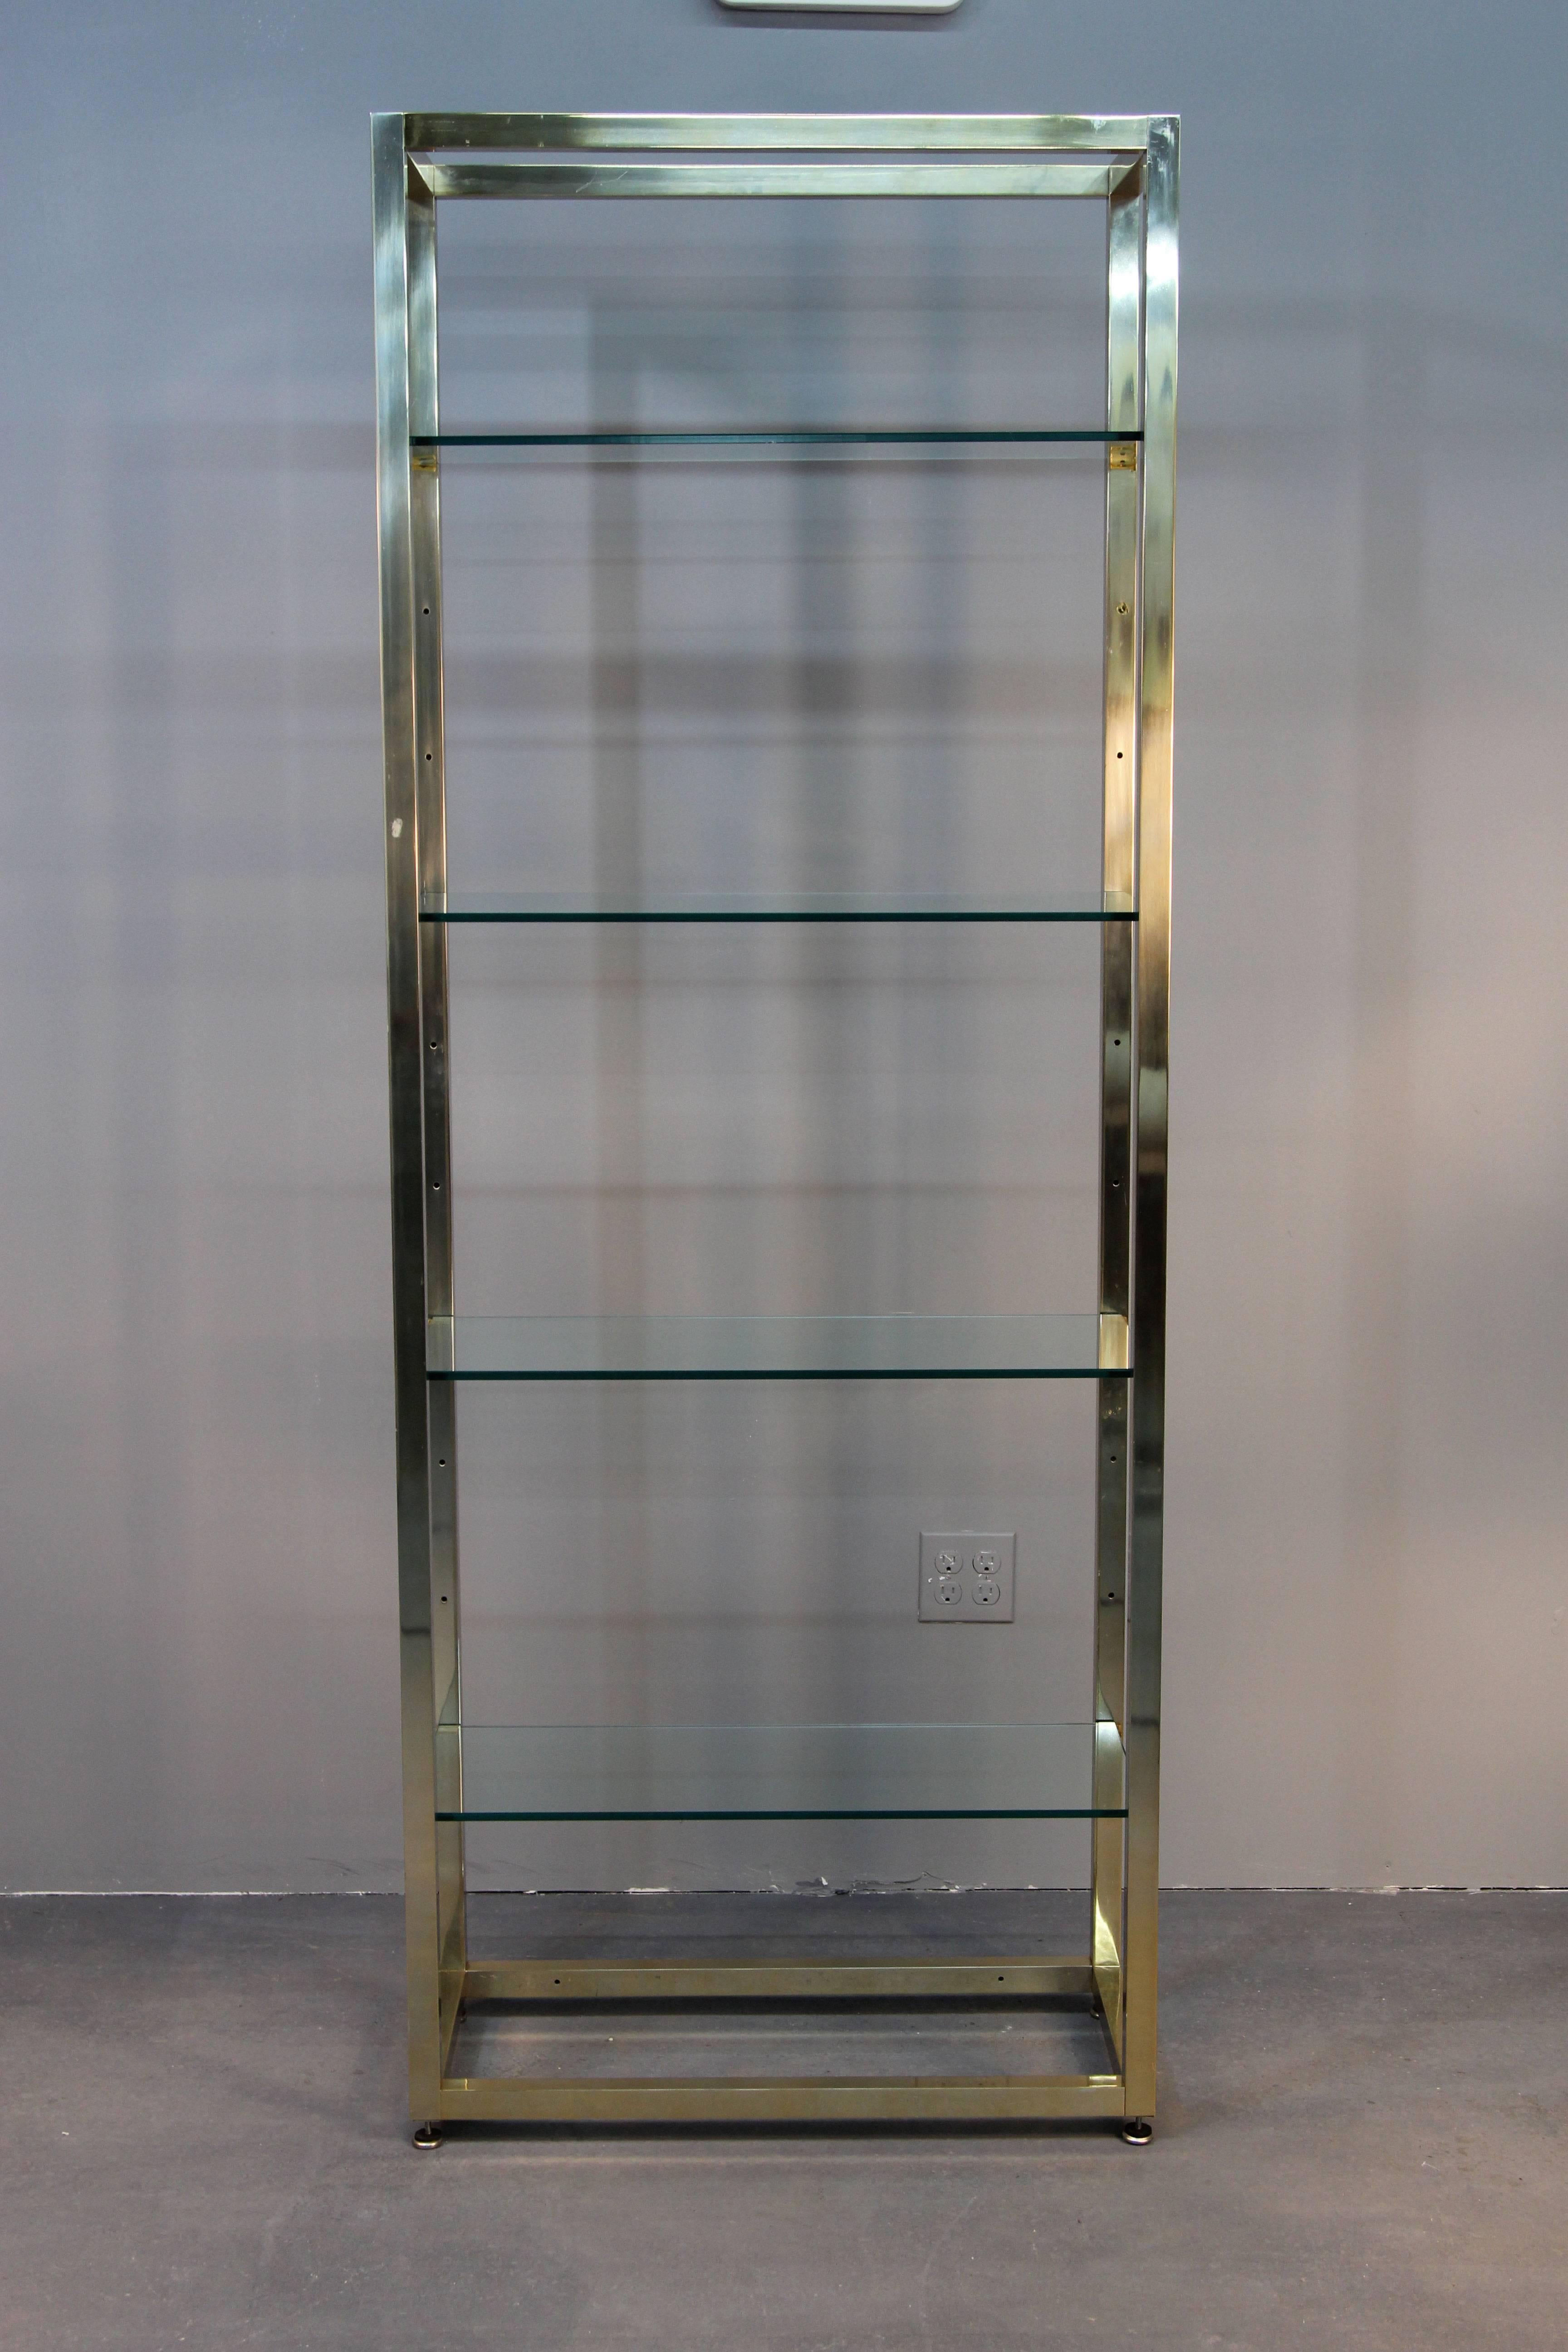 Beautiful modern brass etagere with glass shelves. Clean lines and style.